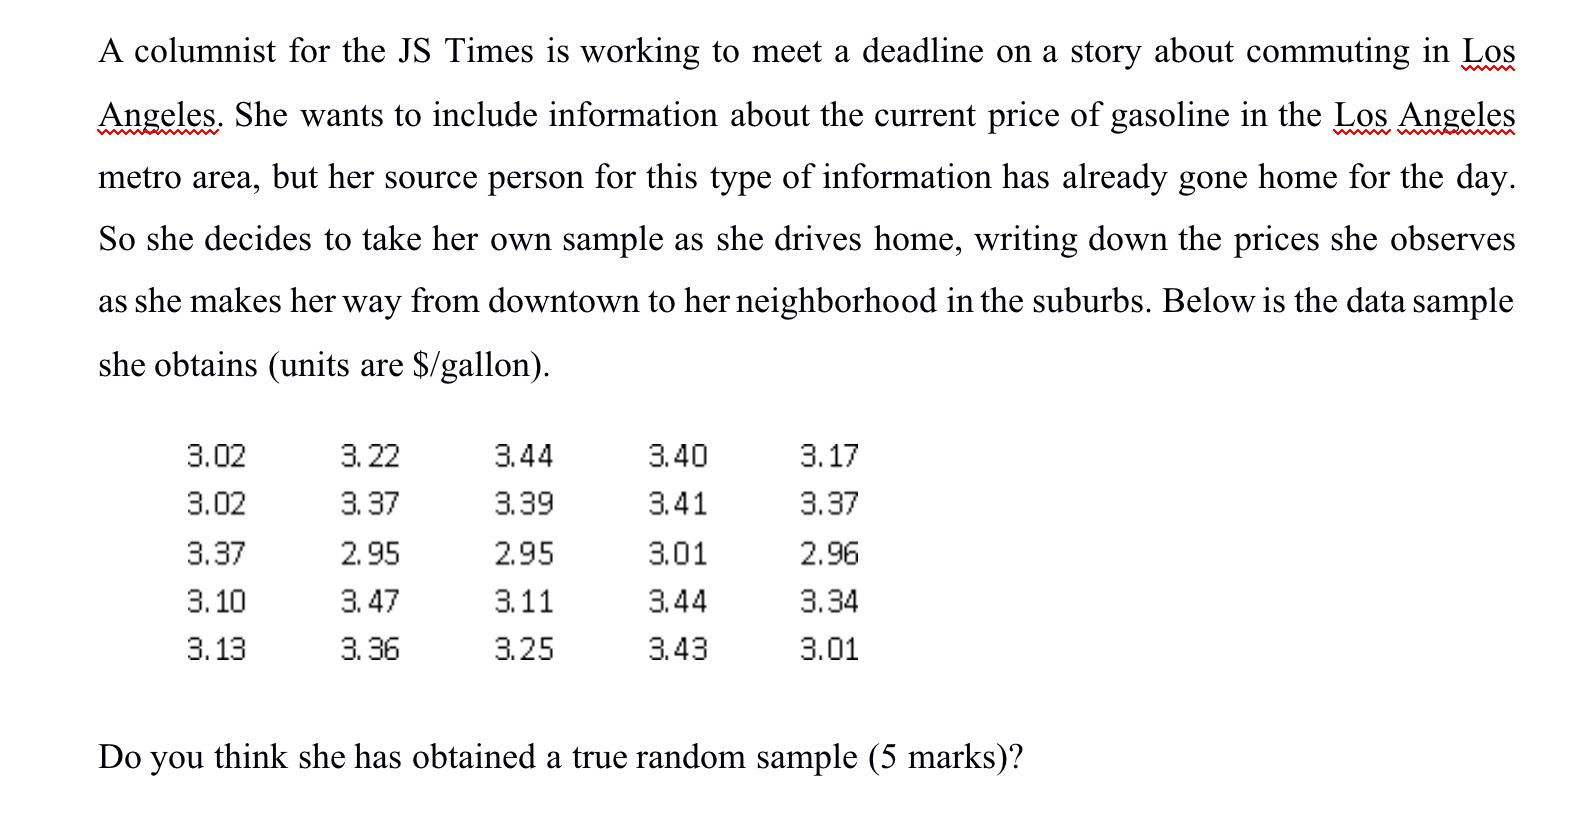 A columnist for the JS Times is working to meet a deadline on a story about commuting in Los Angeles. She wants to include in